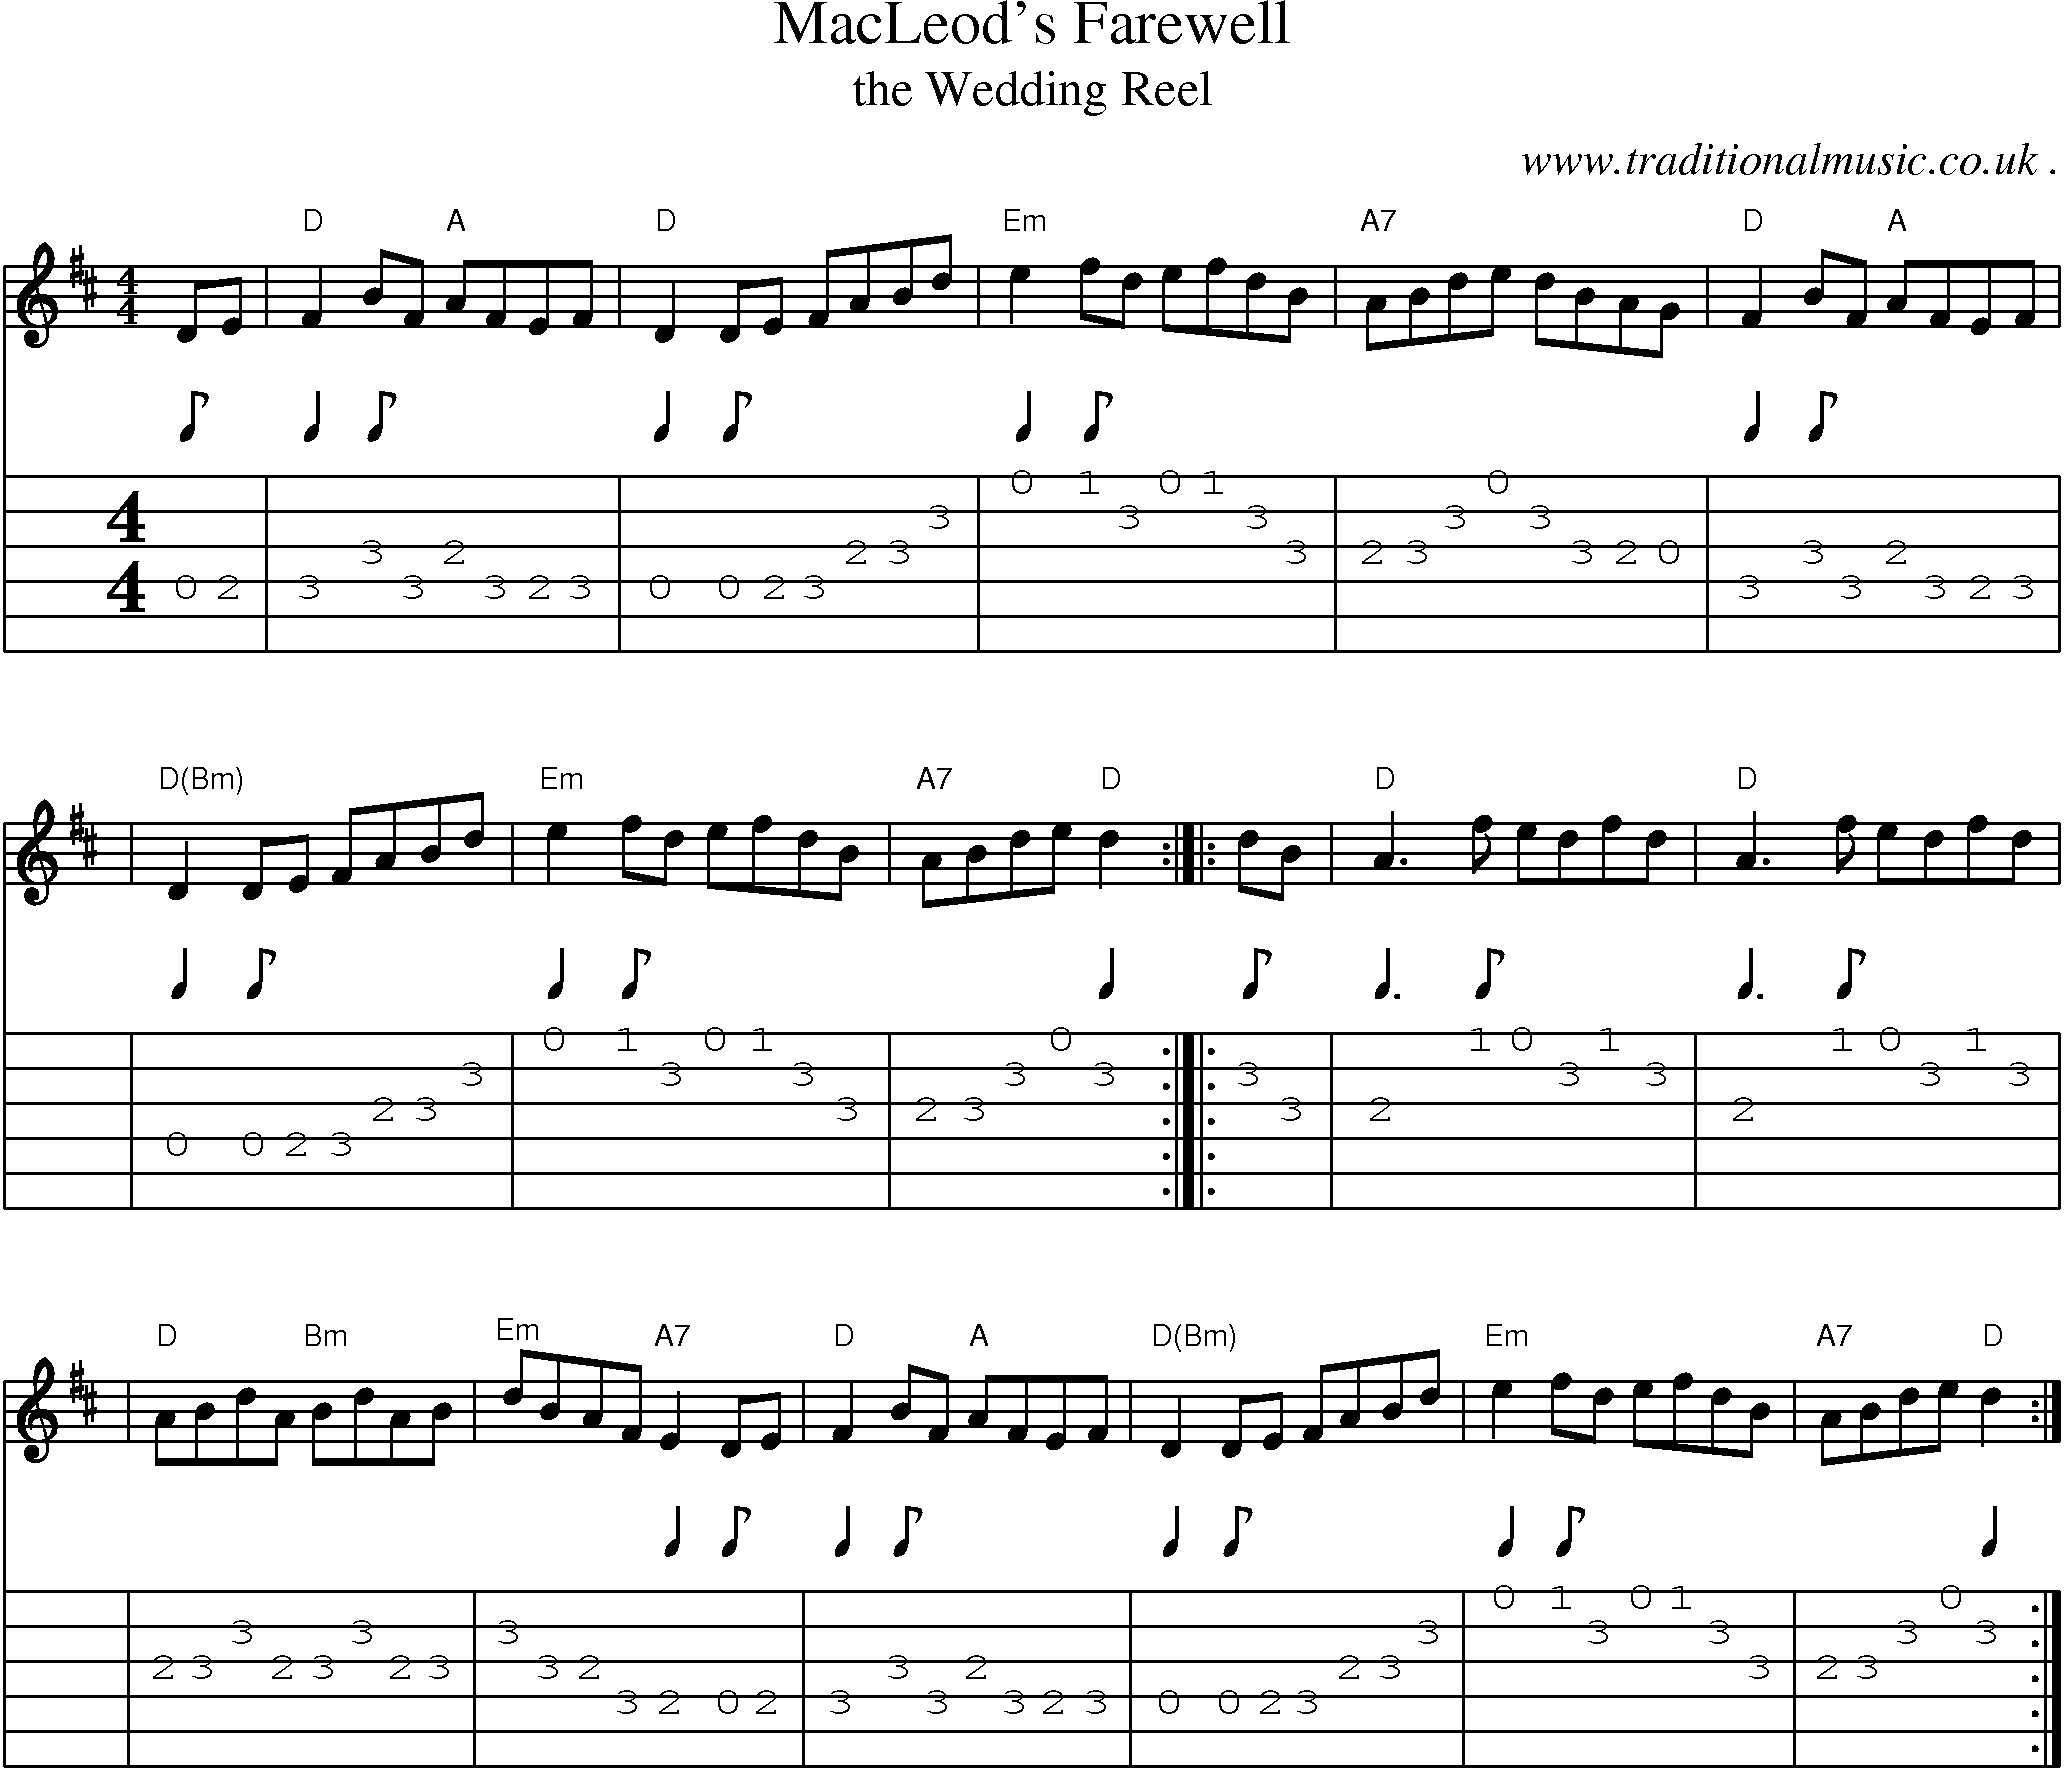 Sheet-music  score, Chords and Guitar Tabs for Macleods Farewell